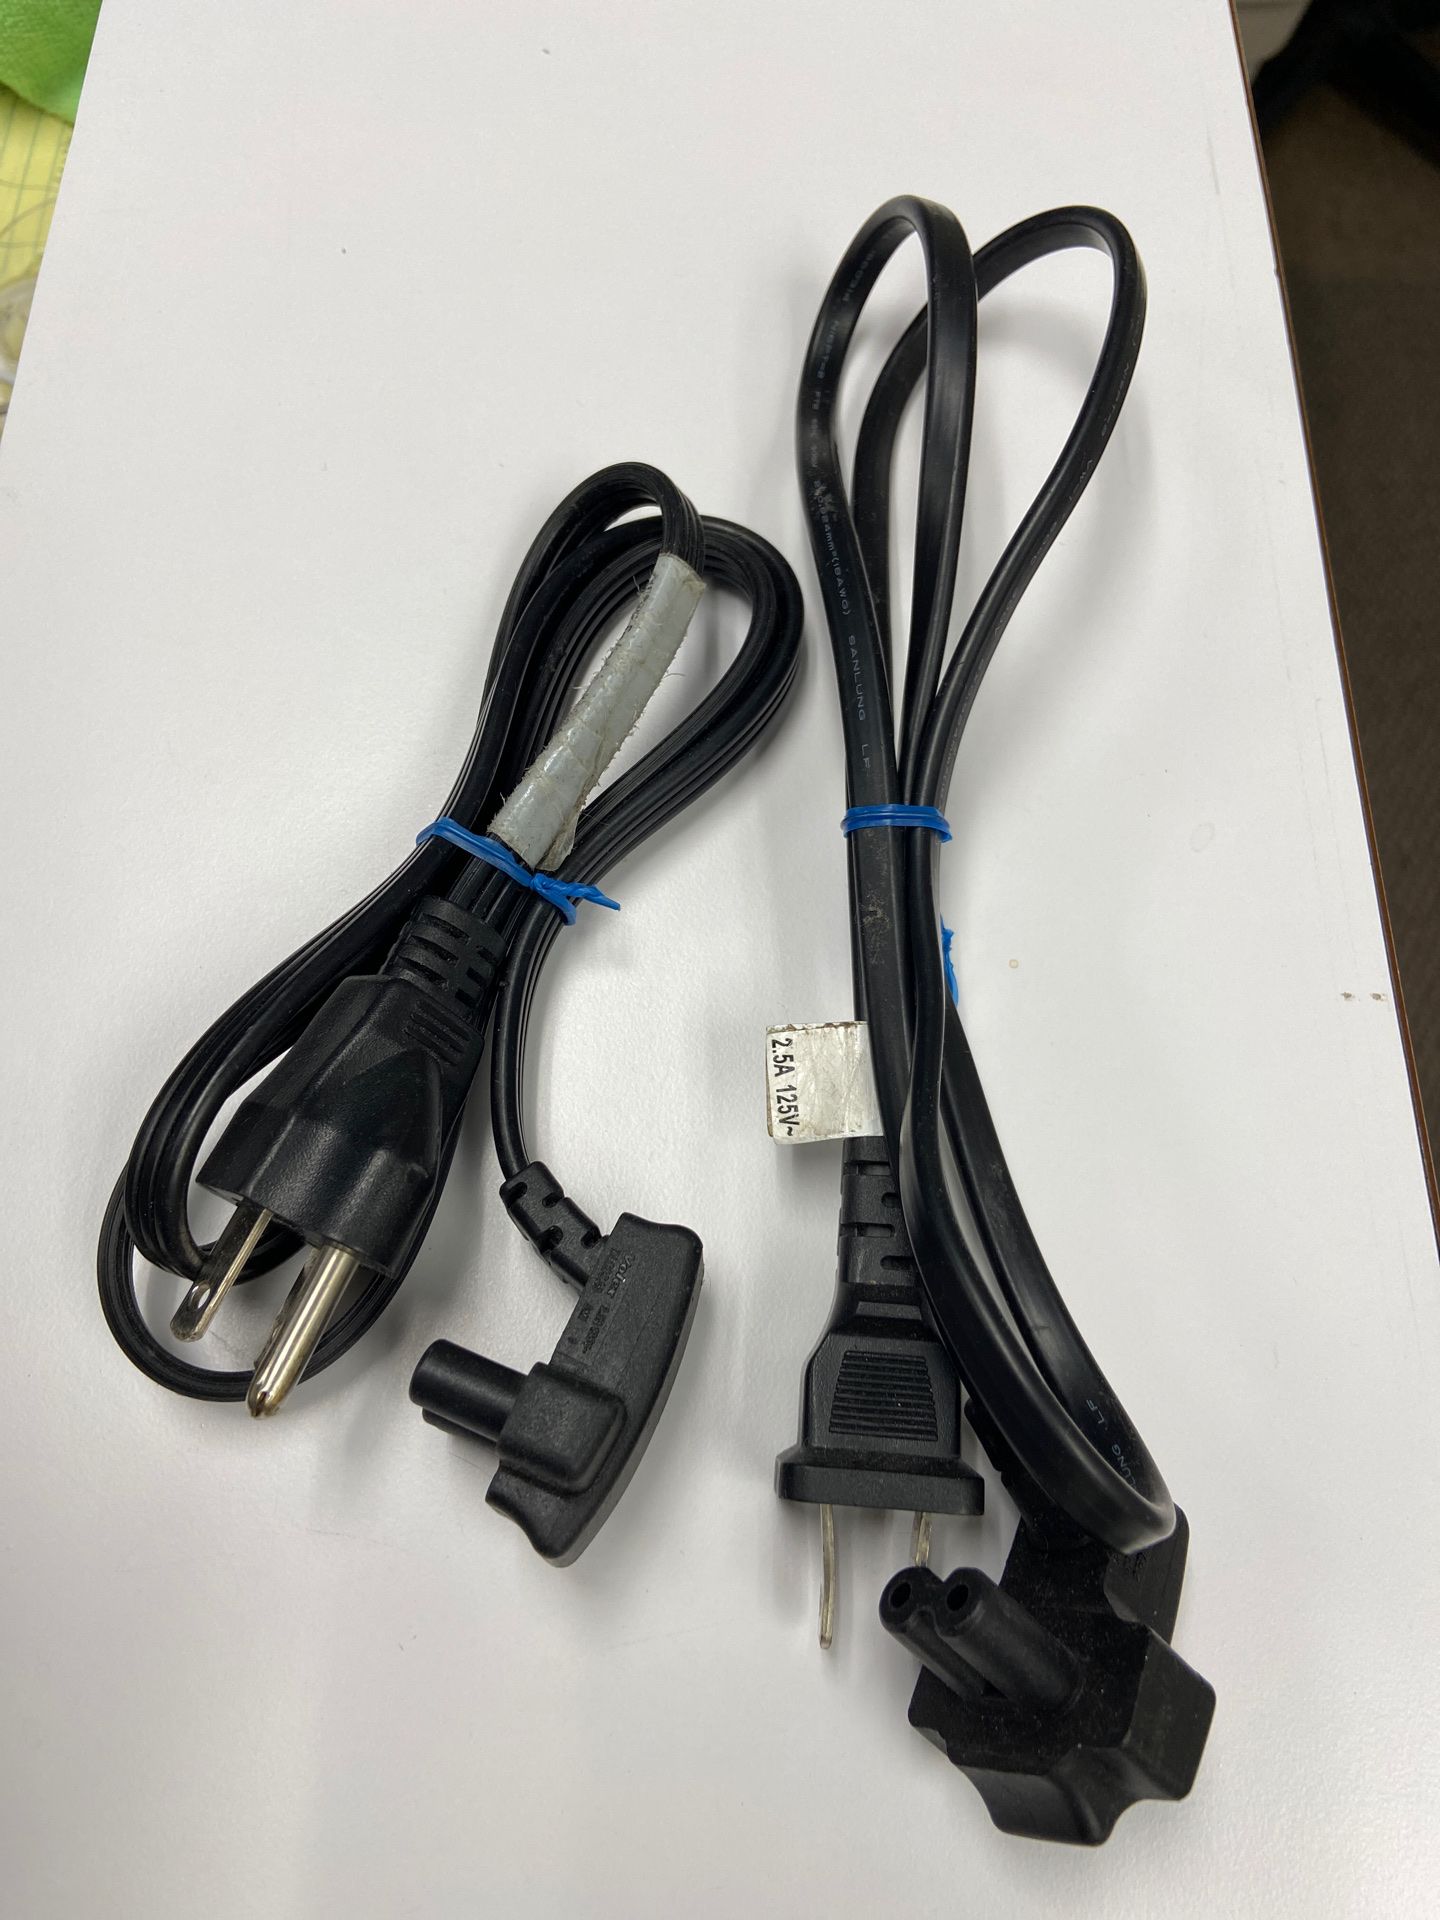 Dell laptop AC power cables, does not include the AC adapter